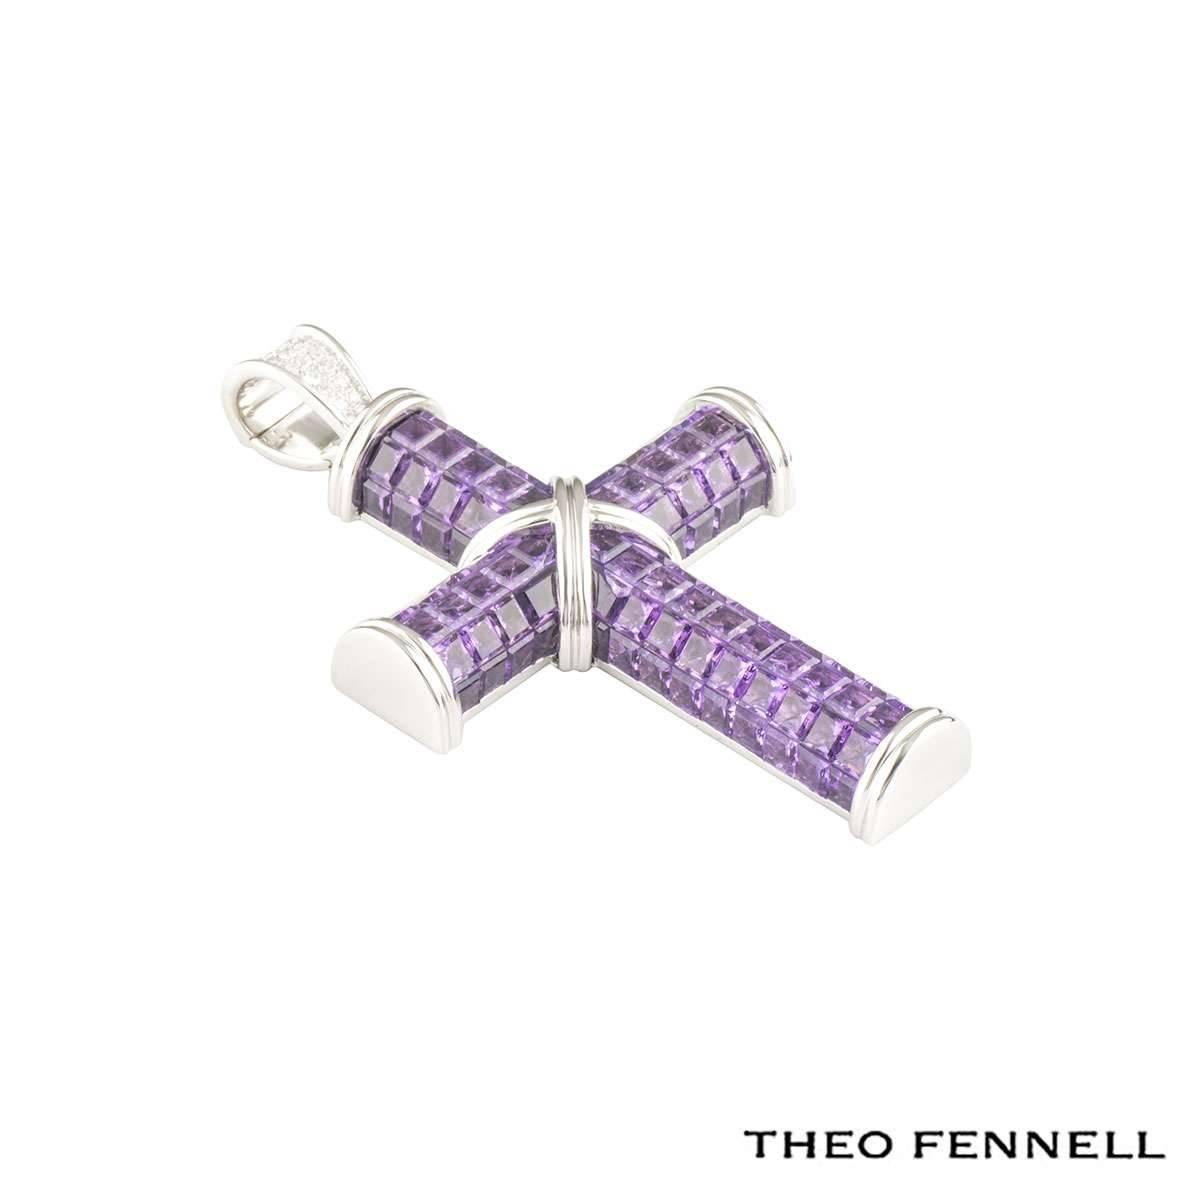 An 18k white gold cross pendant by Theo Fennell from the Crosses collection. The pendant features 109 square cut amethyst stones, totalling approximately 21.80ct. The pendant has a white gold 'X' set to the centre with matching raised terminations